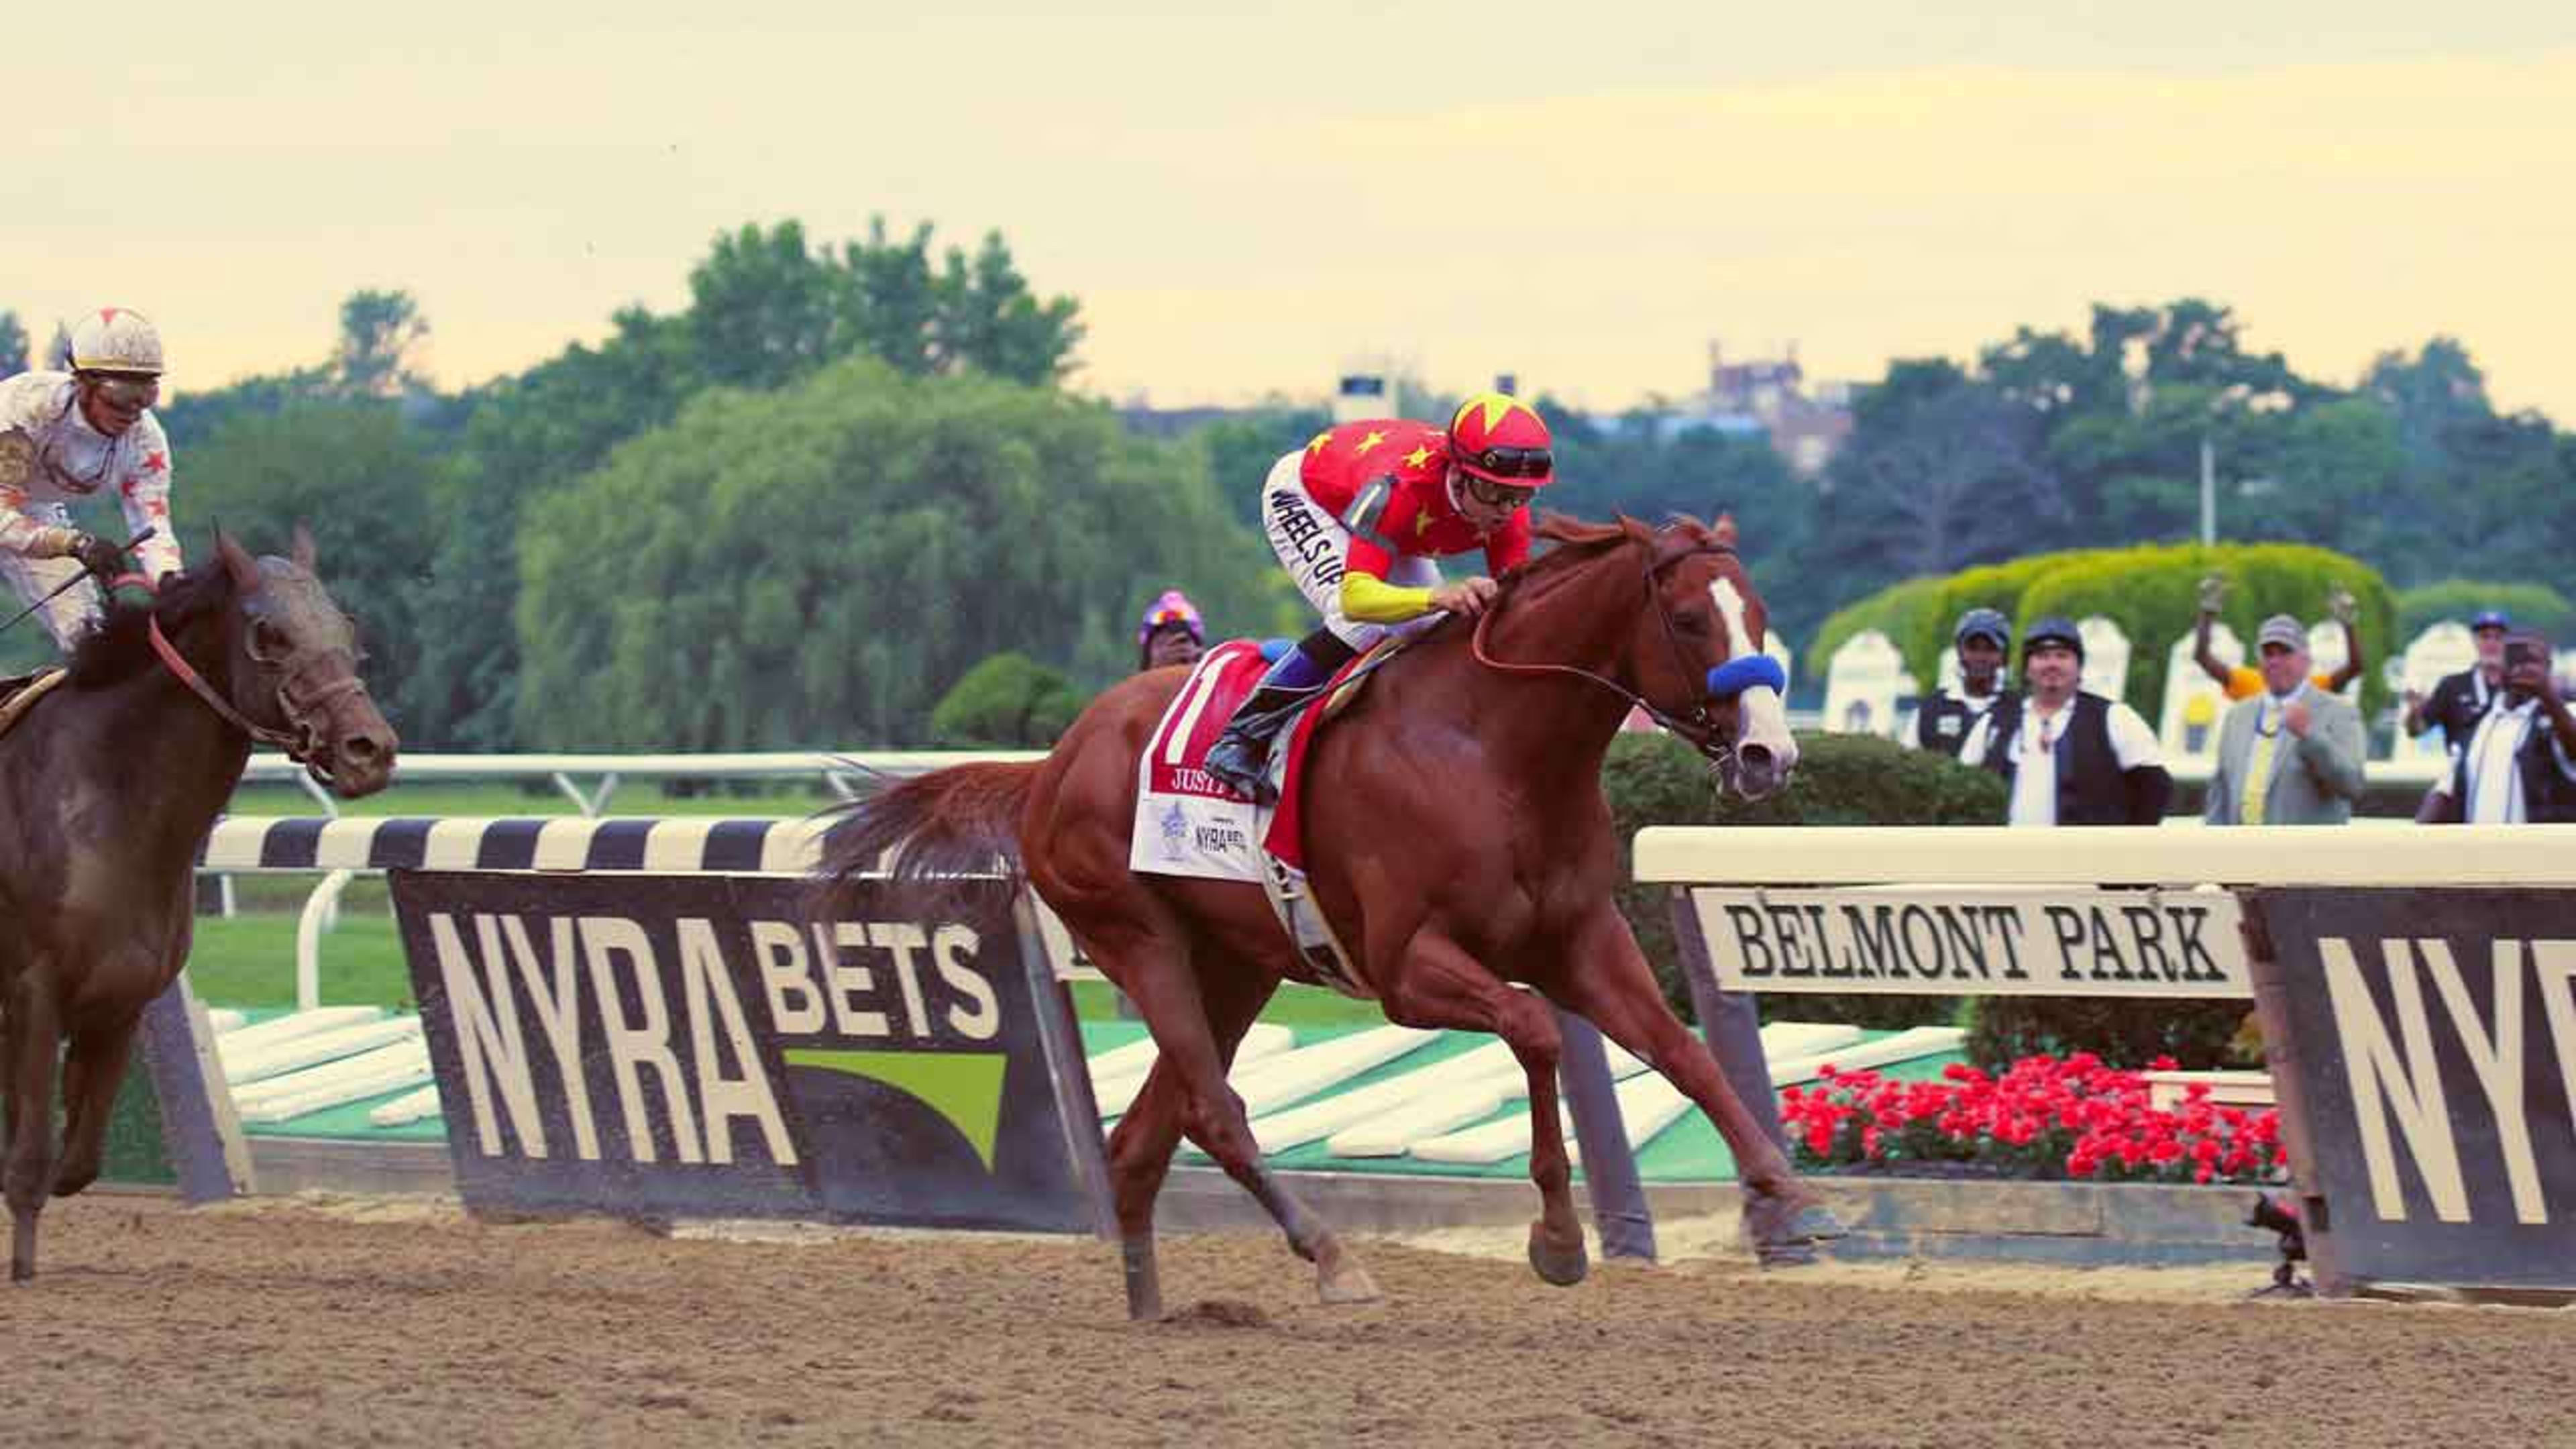 How to watch the 2019 Belmont Stakes on NBC without cable